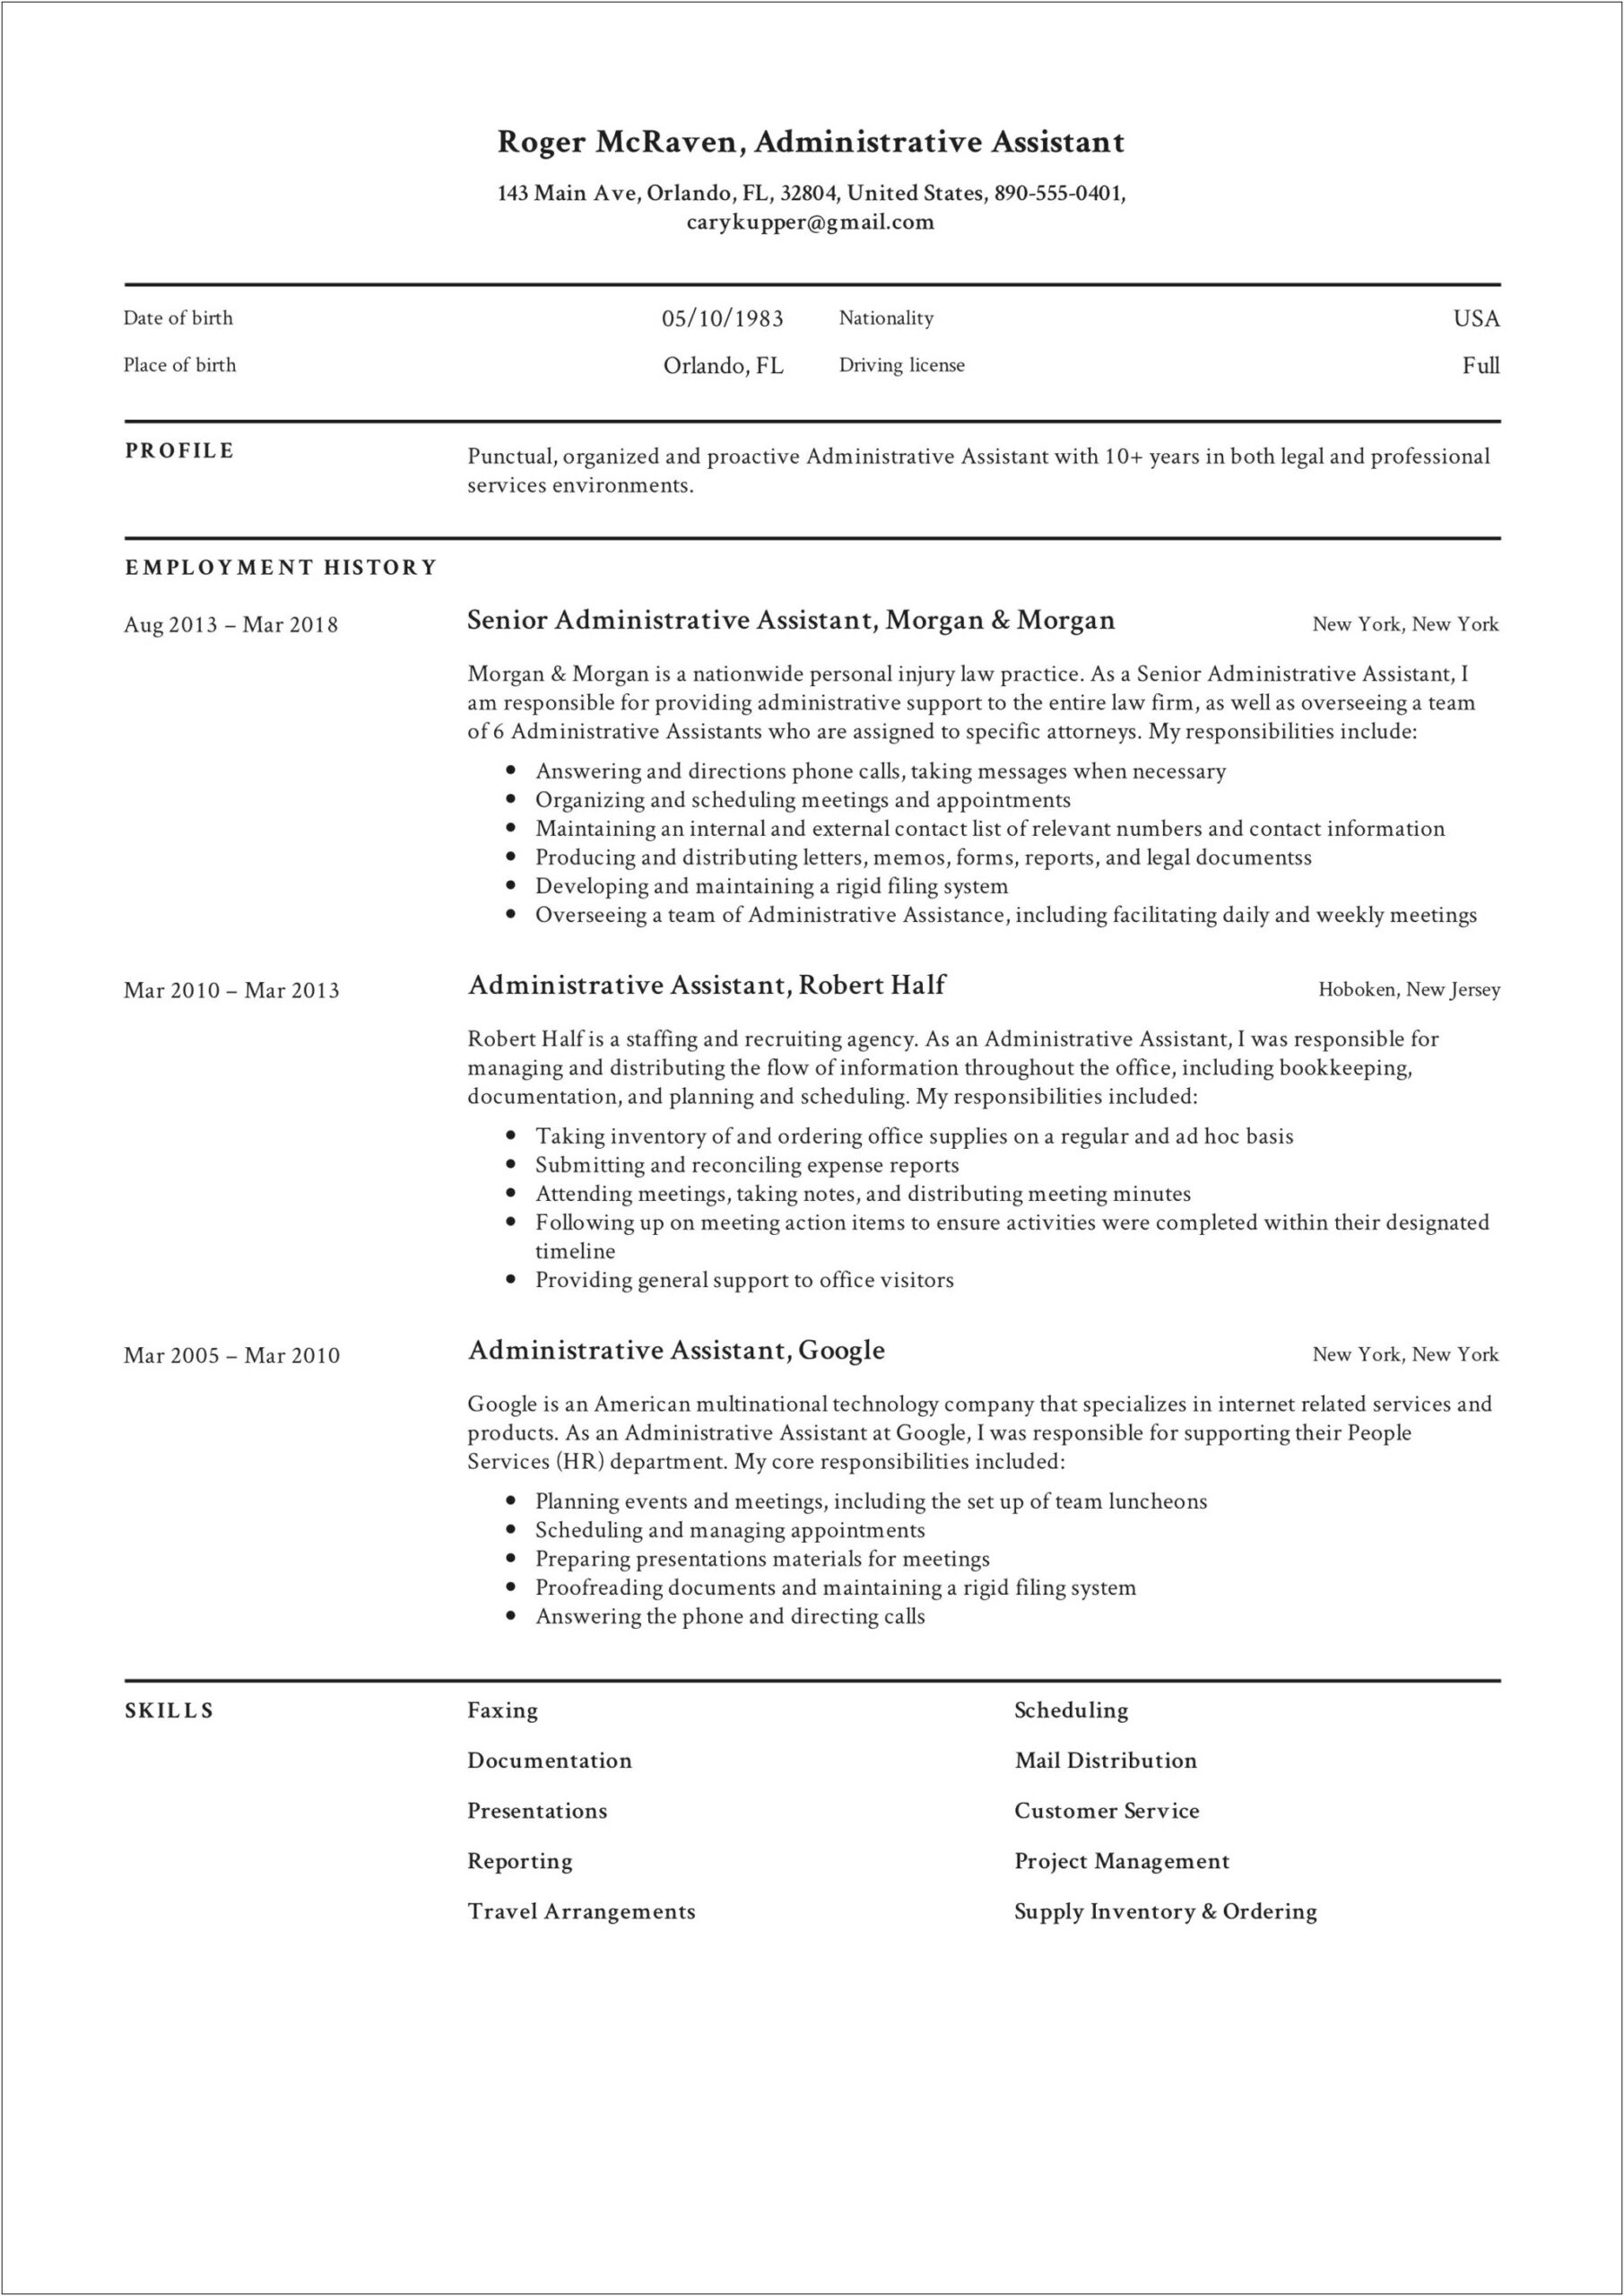 Example Of Resume For Administration Job